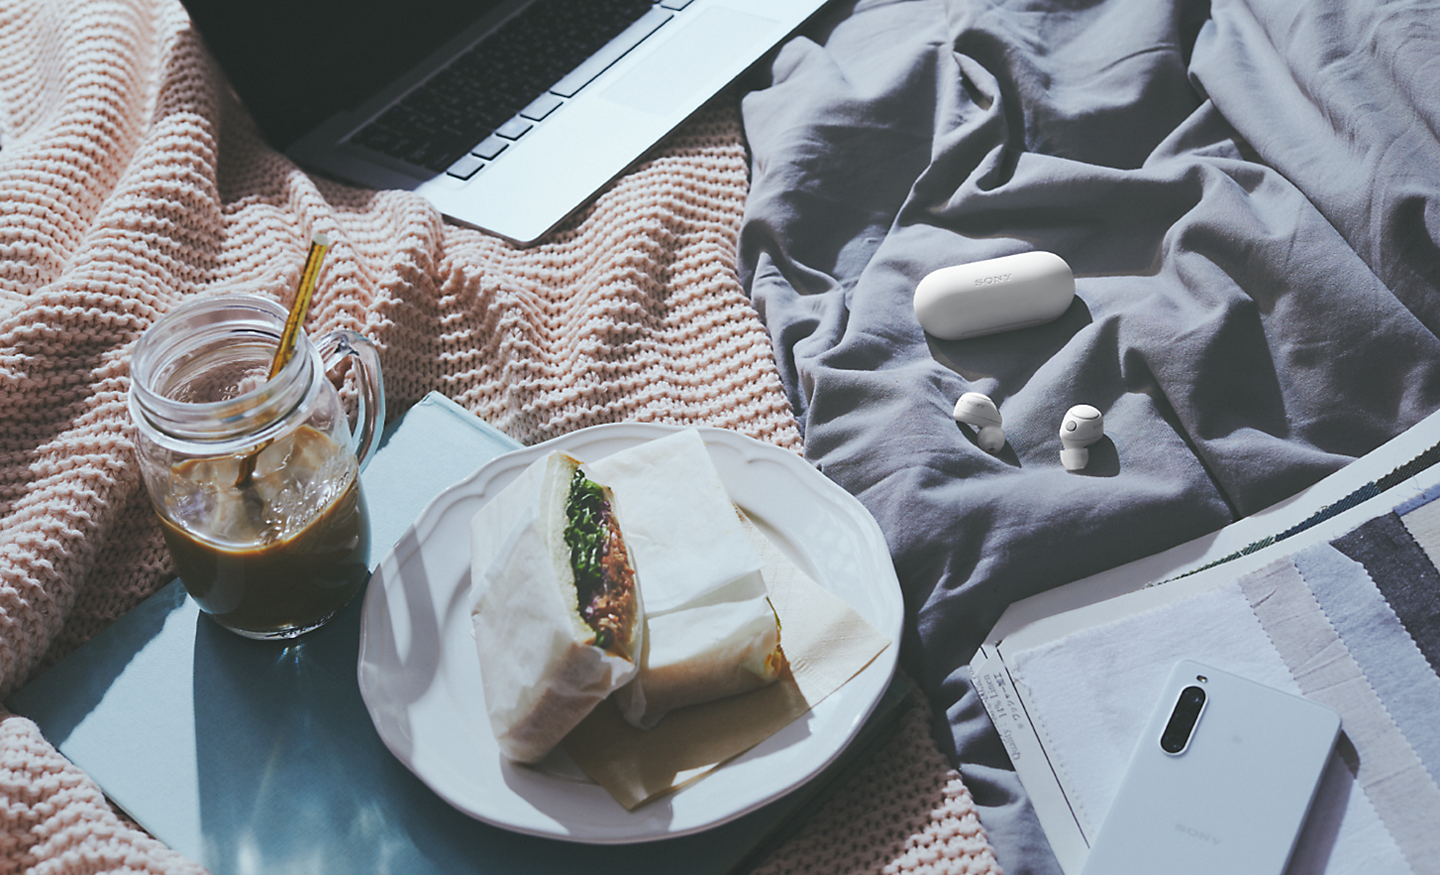 Image of the white WF-C700N headphones and case on a picnic blanket with food, drink, a laptop and a phone